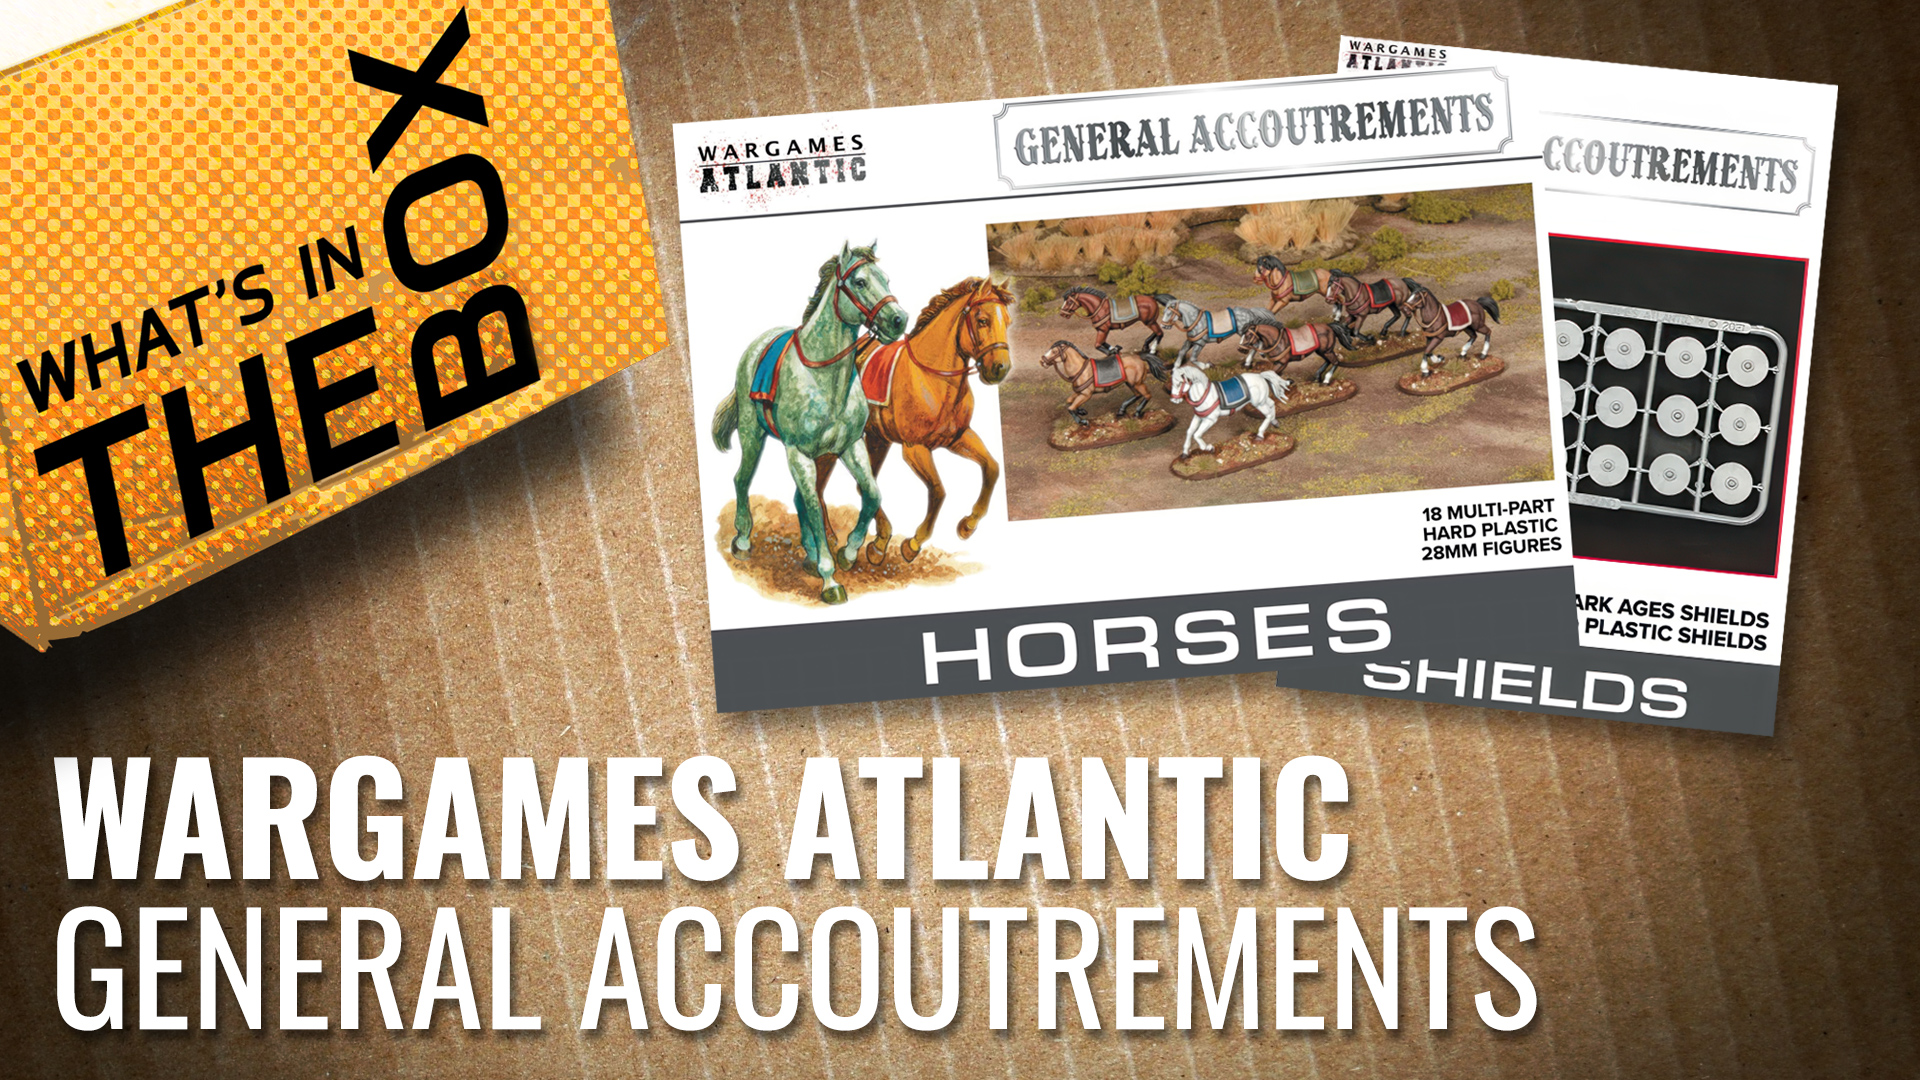 OnTableTop-Unboxing-wargames-atlantic-general-accoutrements-coverimage